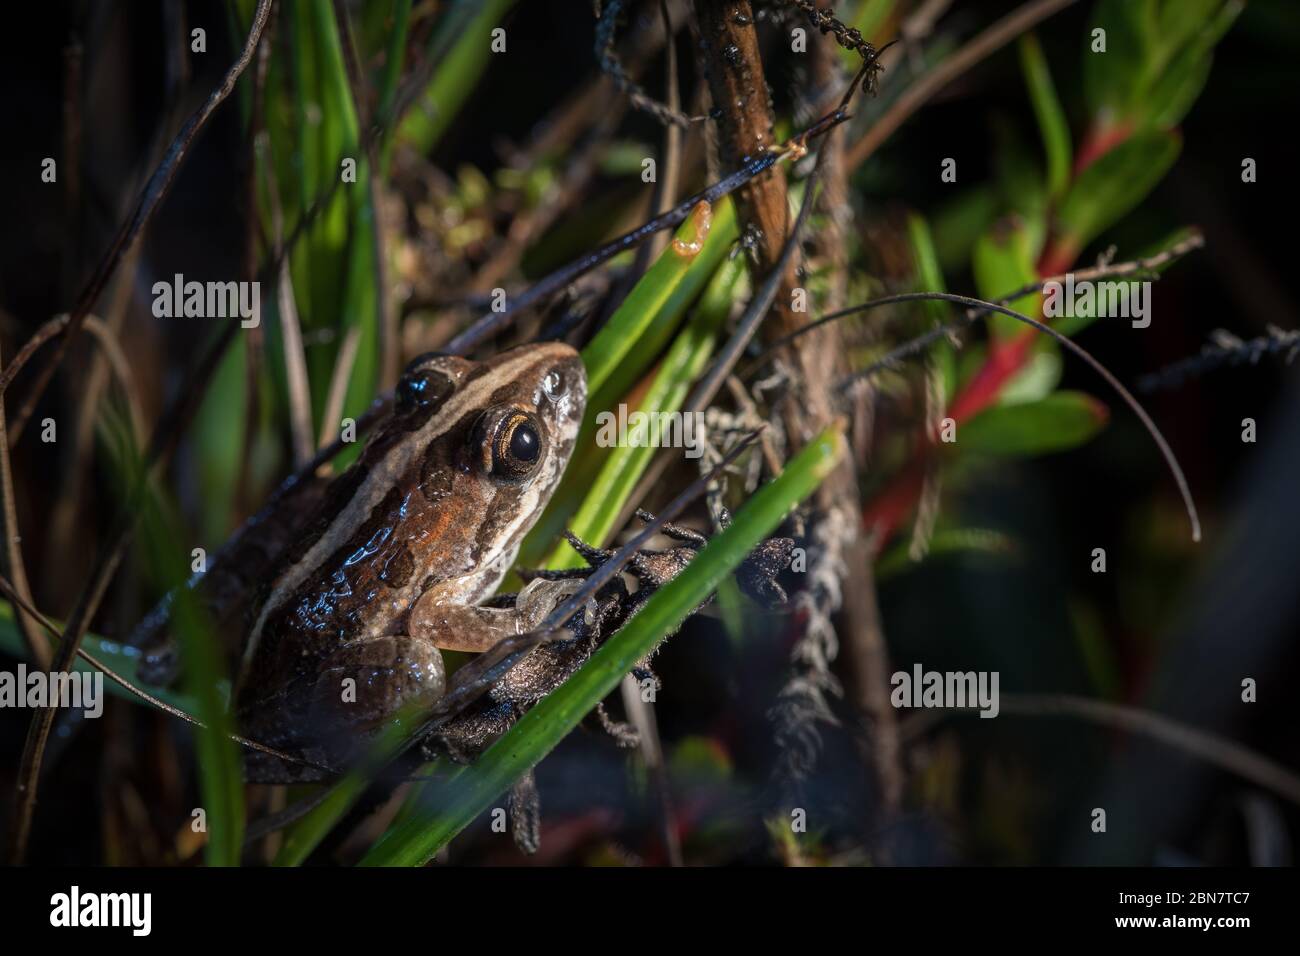 The habitat inside Kenilworth Racecourse Conservation Area, Cape Town, is home to many species including Clicking Stream Frog, Strongylopus grayii. Stock Photo